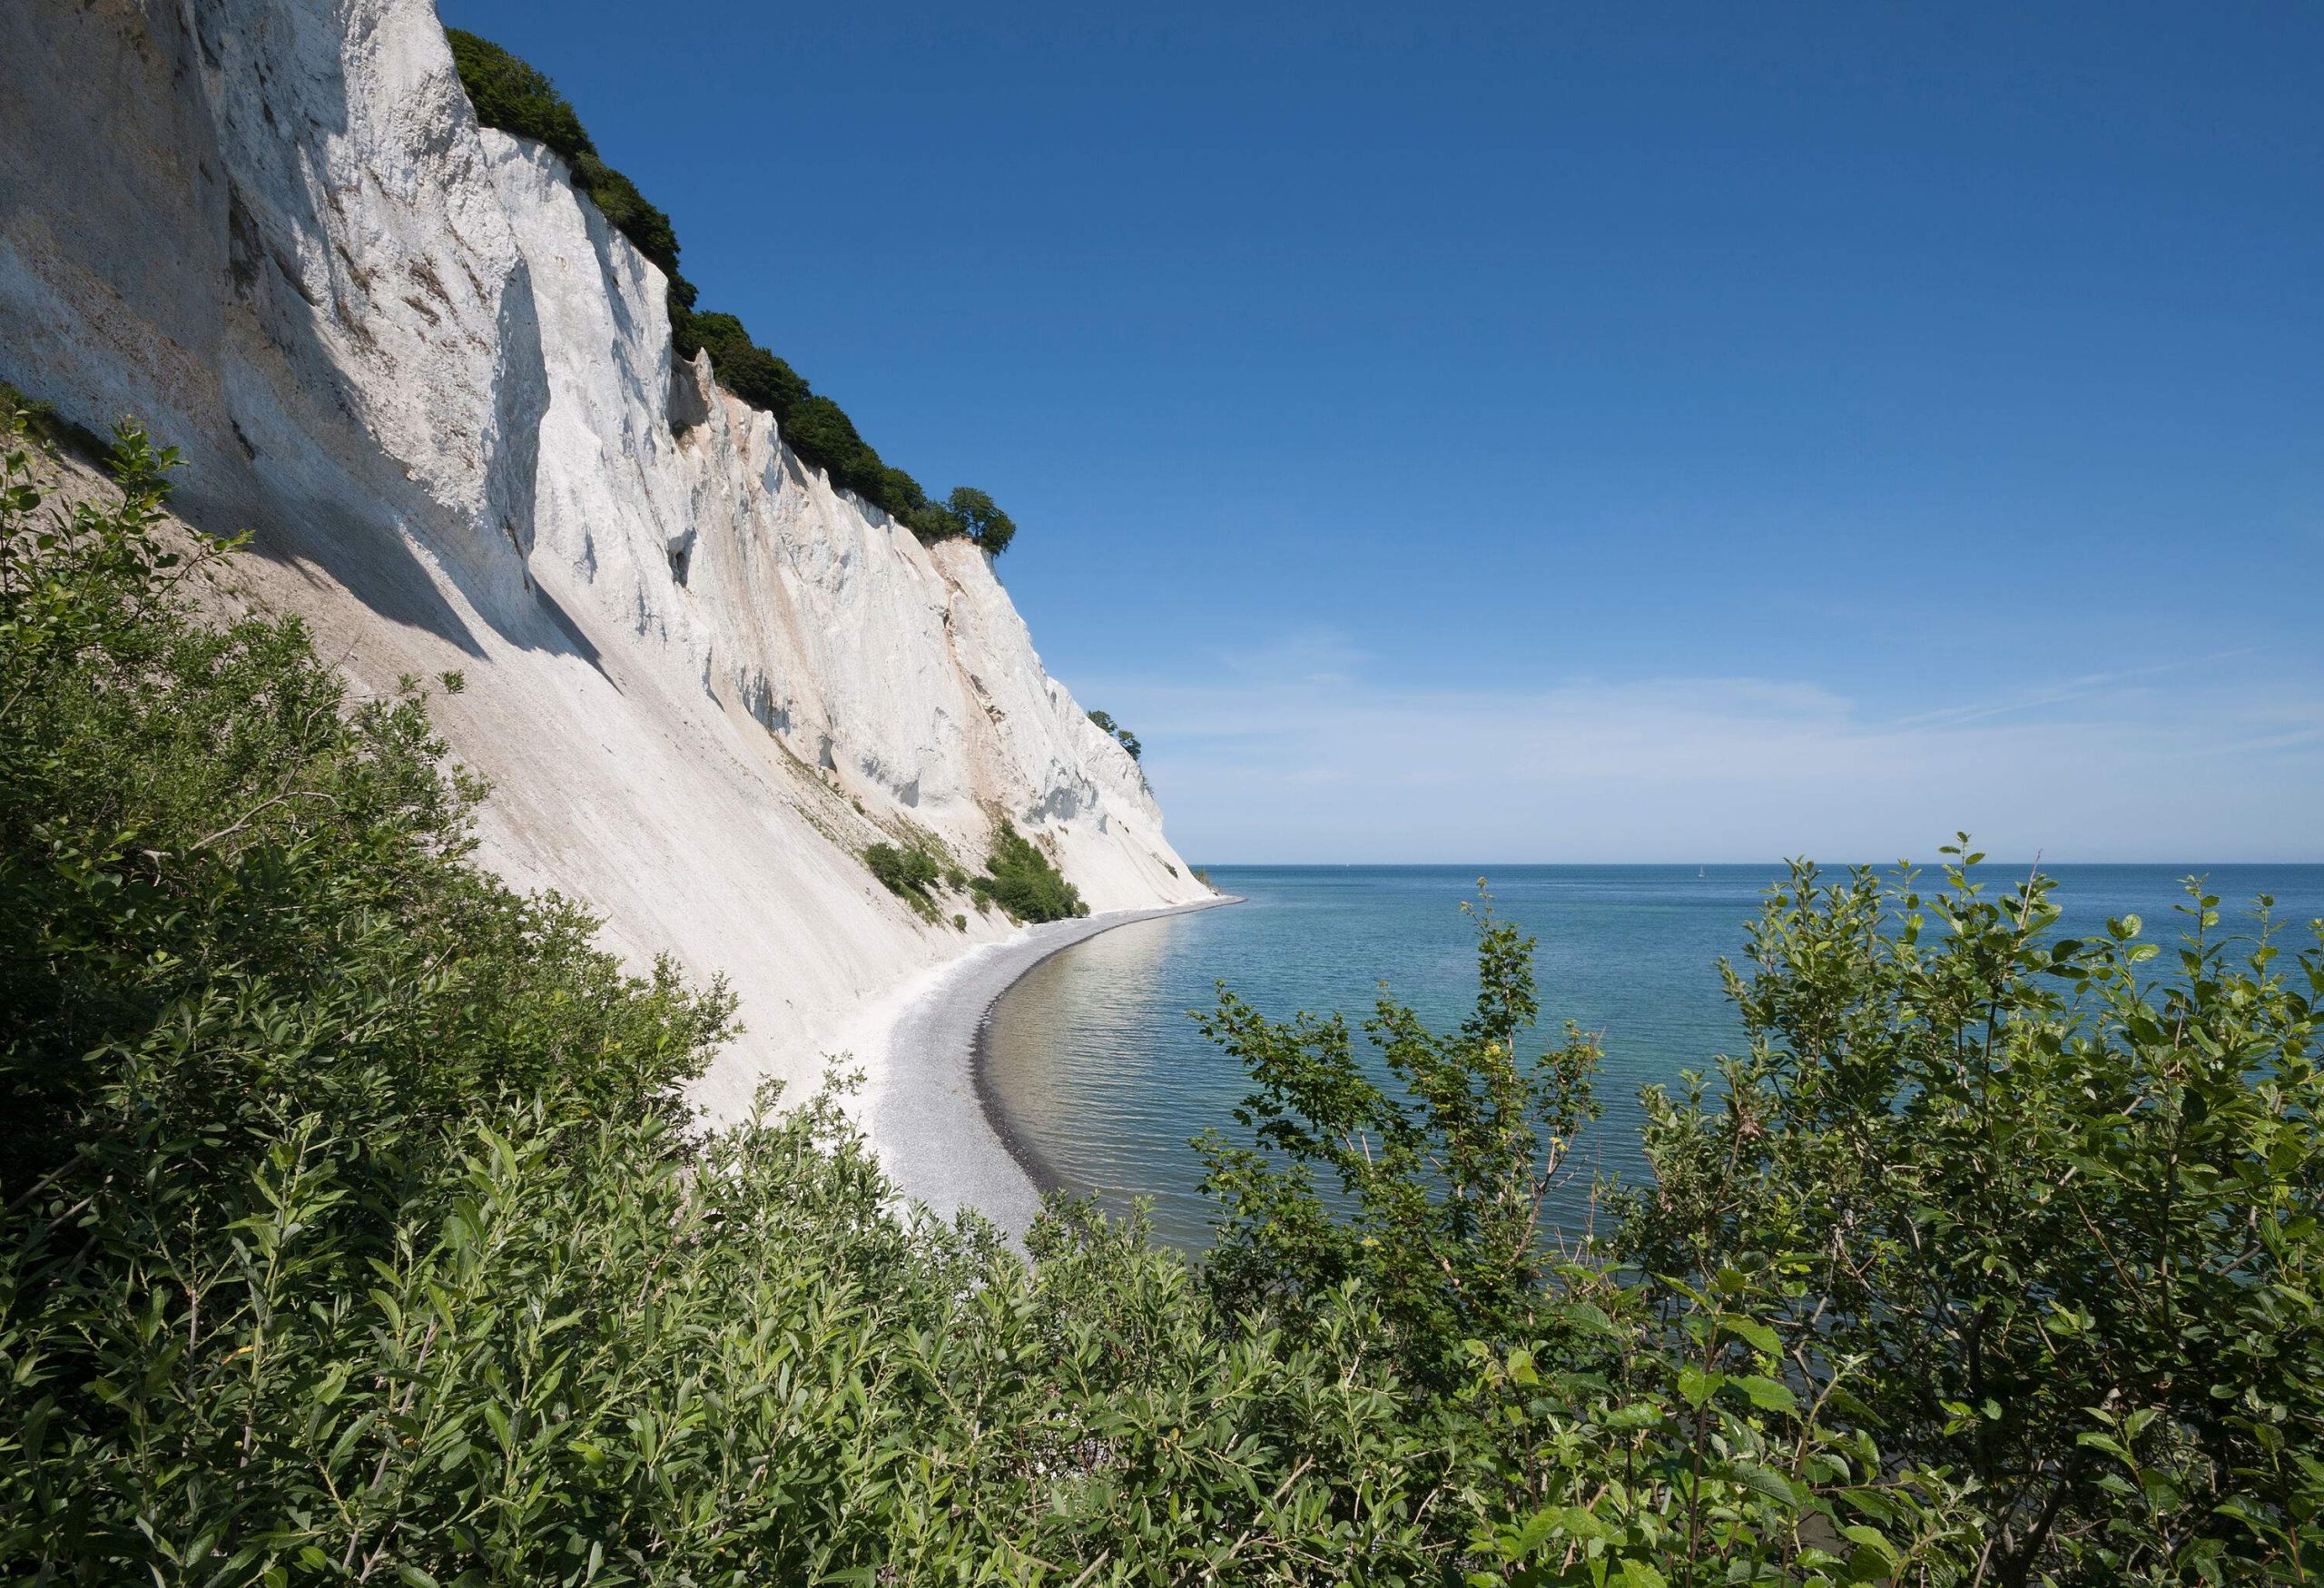 A stretch of a chalk cliff covered with lush trees along a tranquil sea against the blue sky.